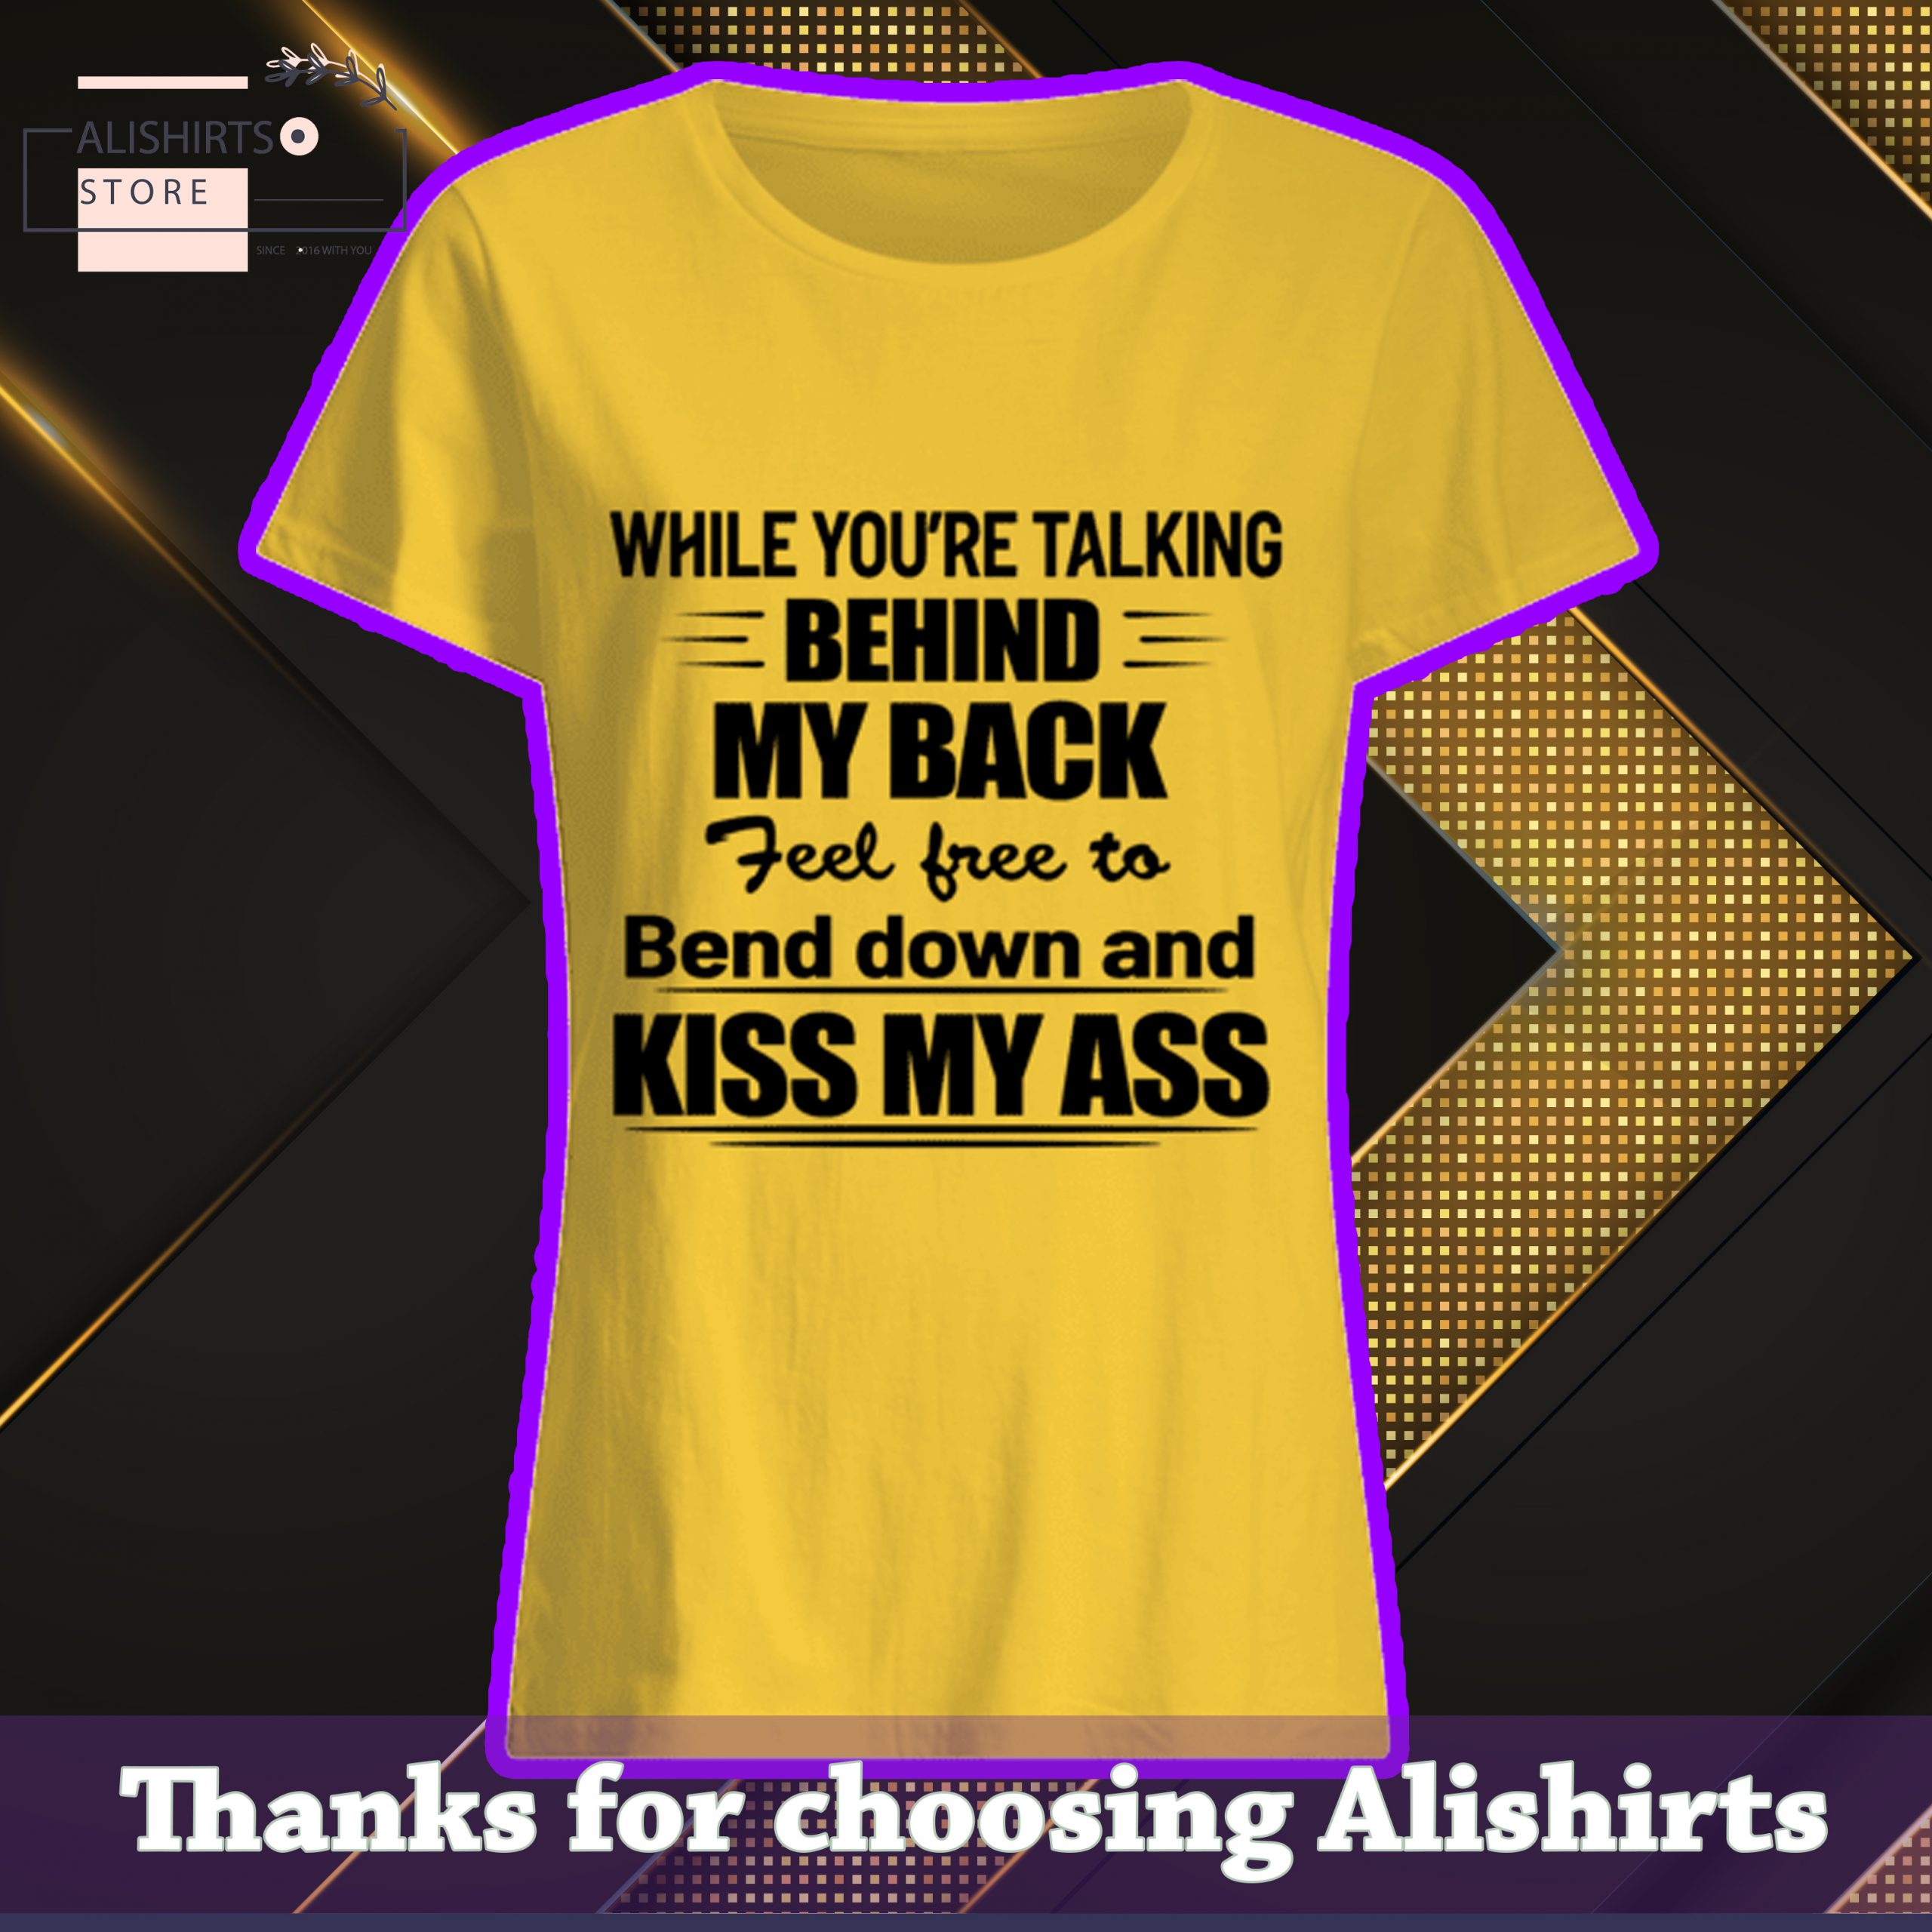 While you’re talking behind my back, feel free to bend down and Kiss my ass shirt, hoodie, tank top